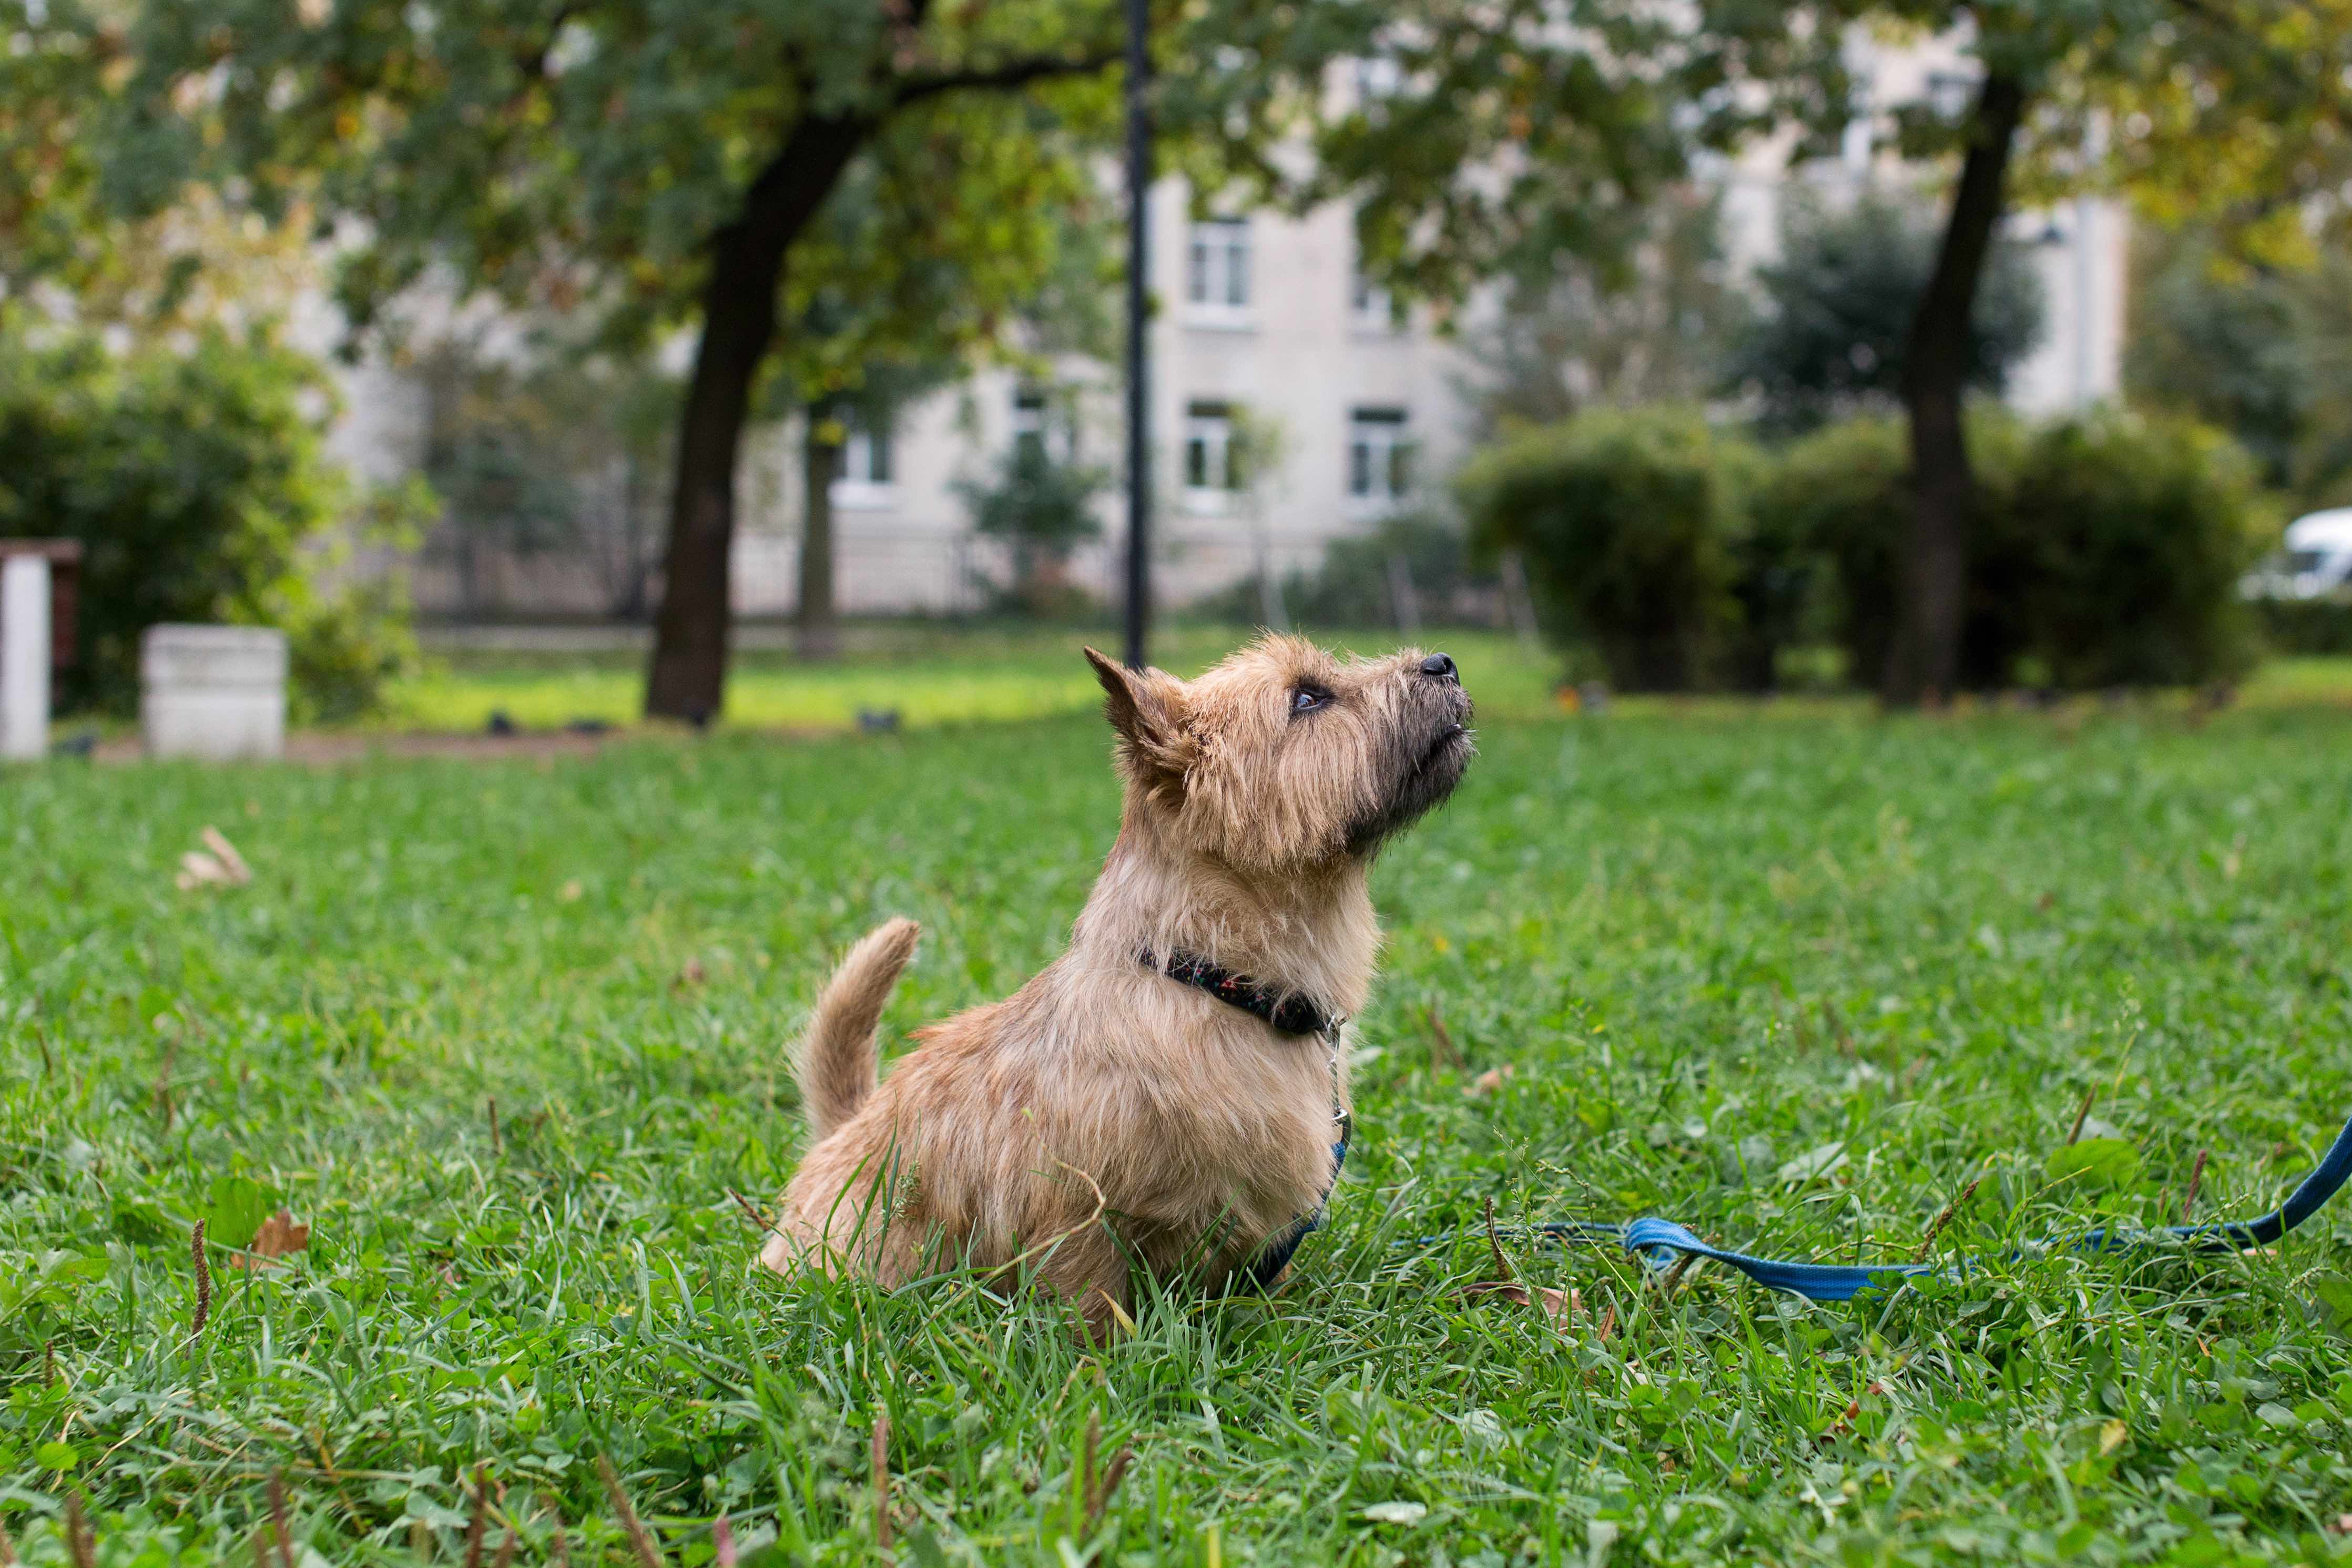 norwich terrier sitting in grass while on a leash